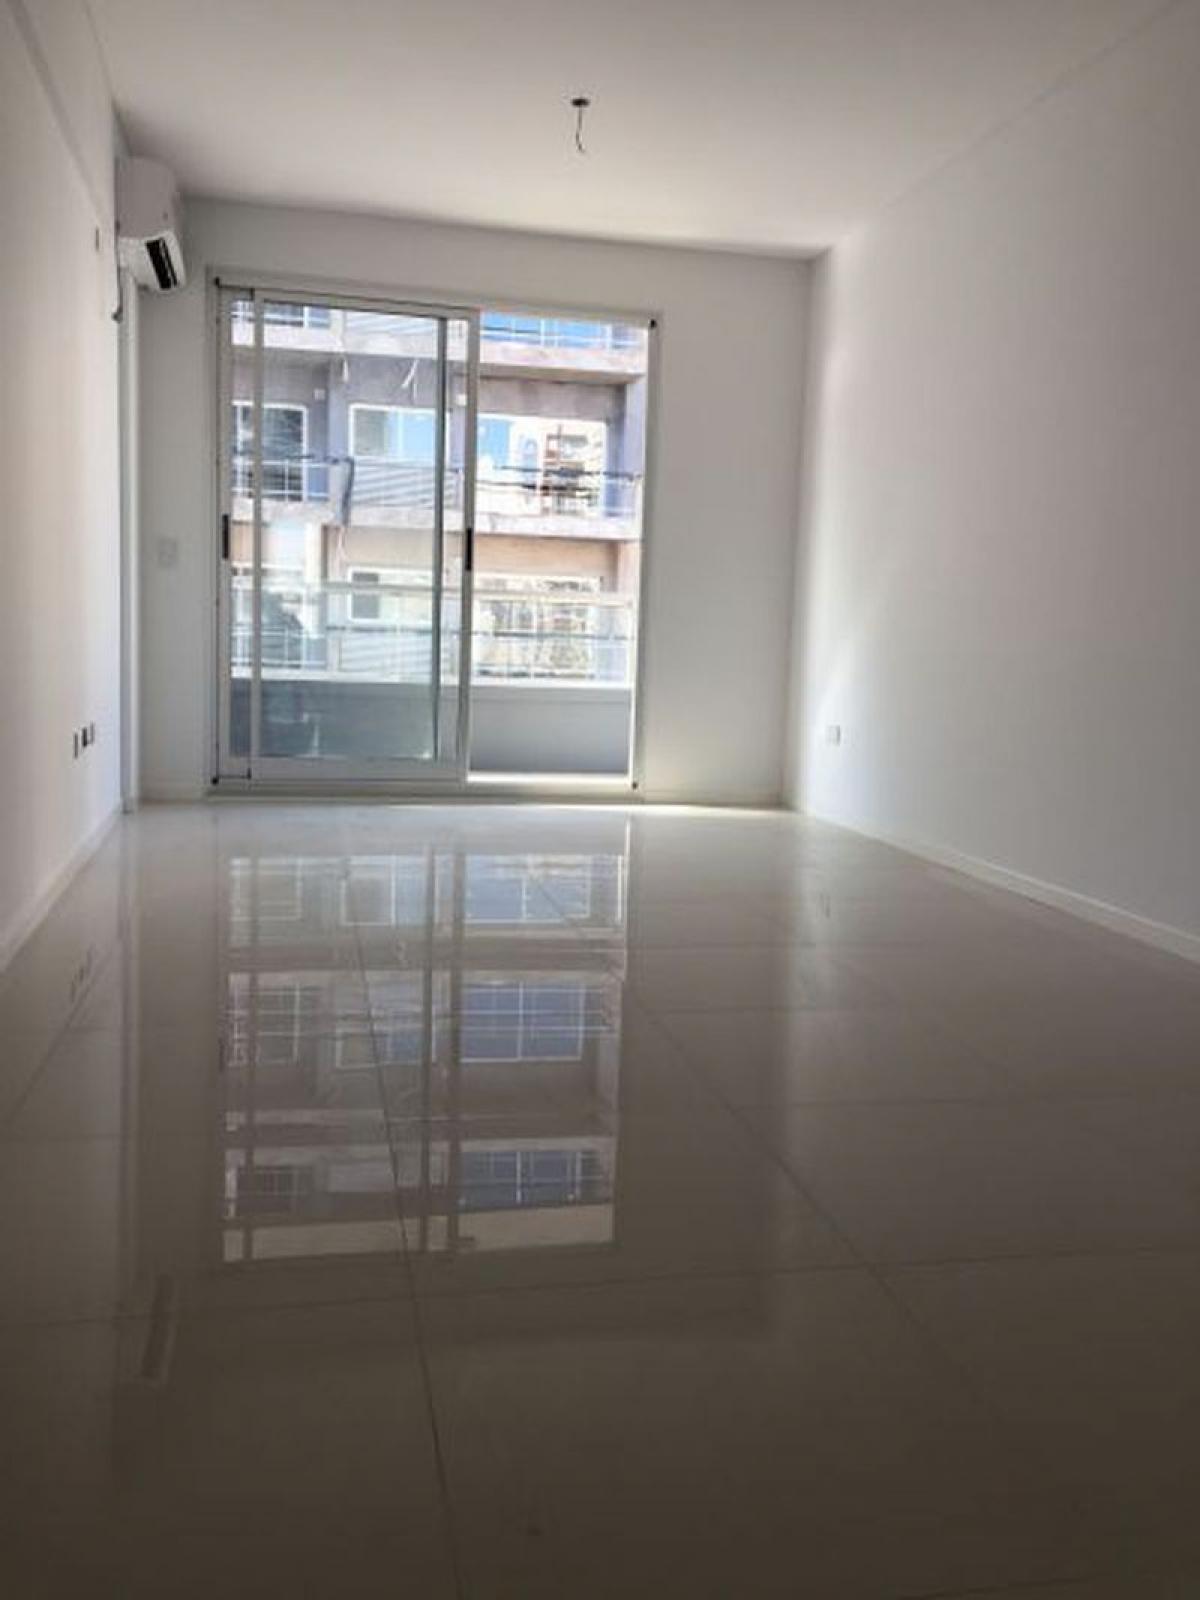 Picture of Apartment For Sale in Capital Federal, Distrito Federal, Argentina